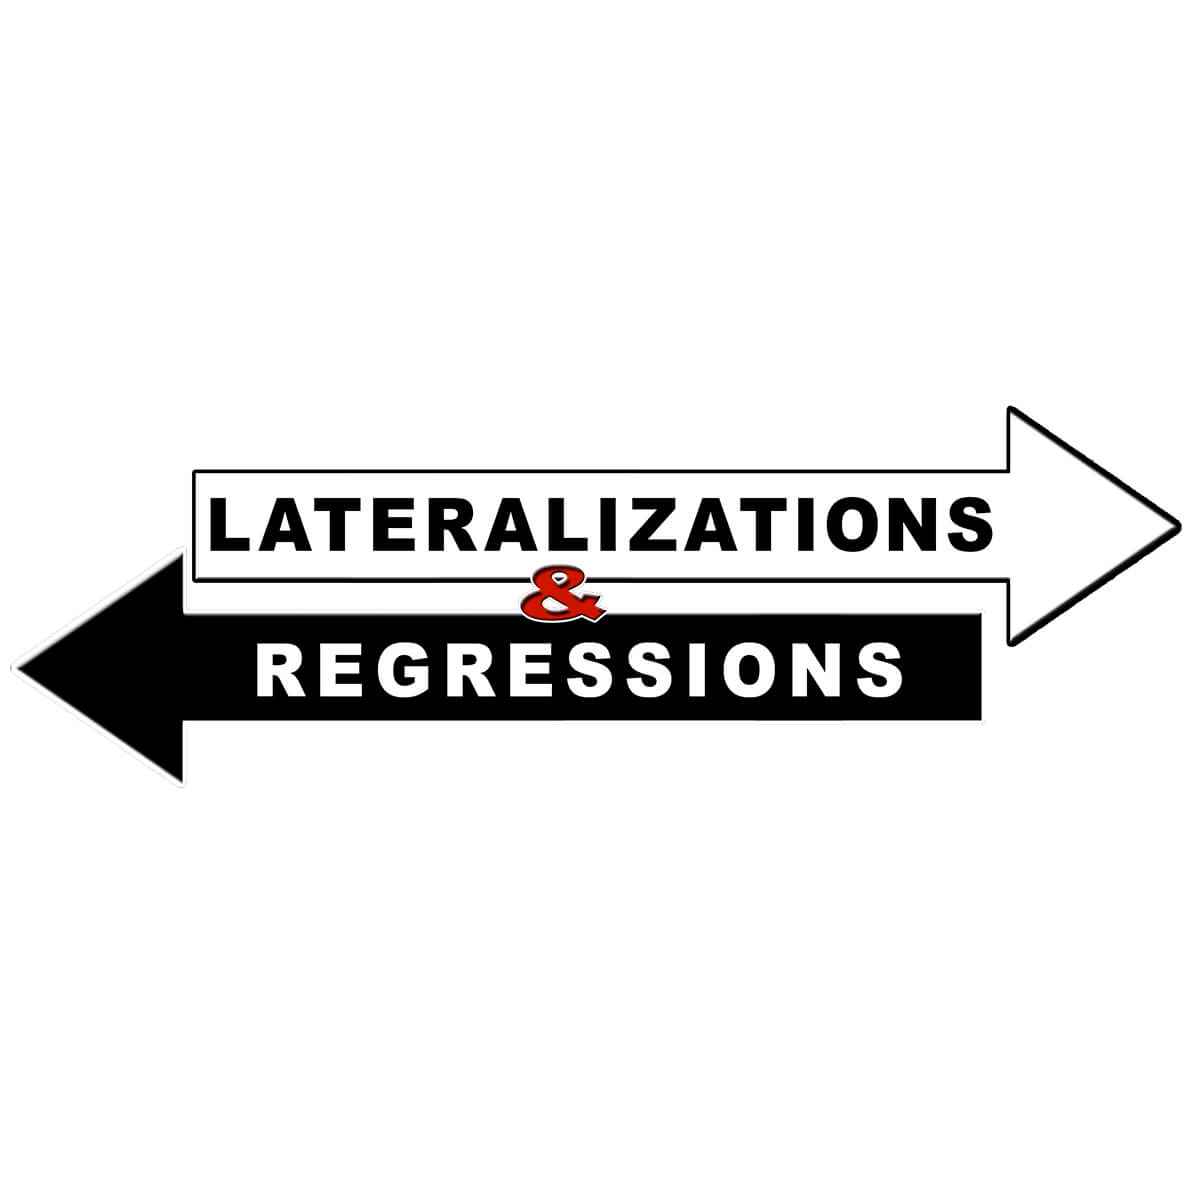 Charlie-Weingroff-Lateralizations-Regressions-1